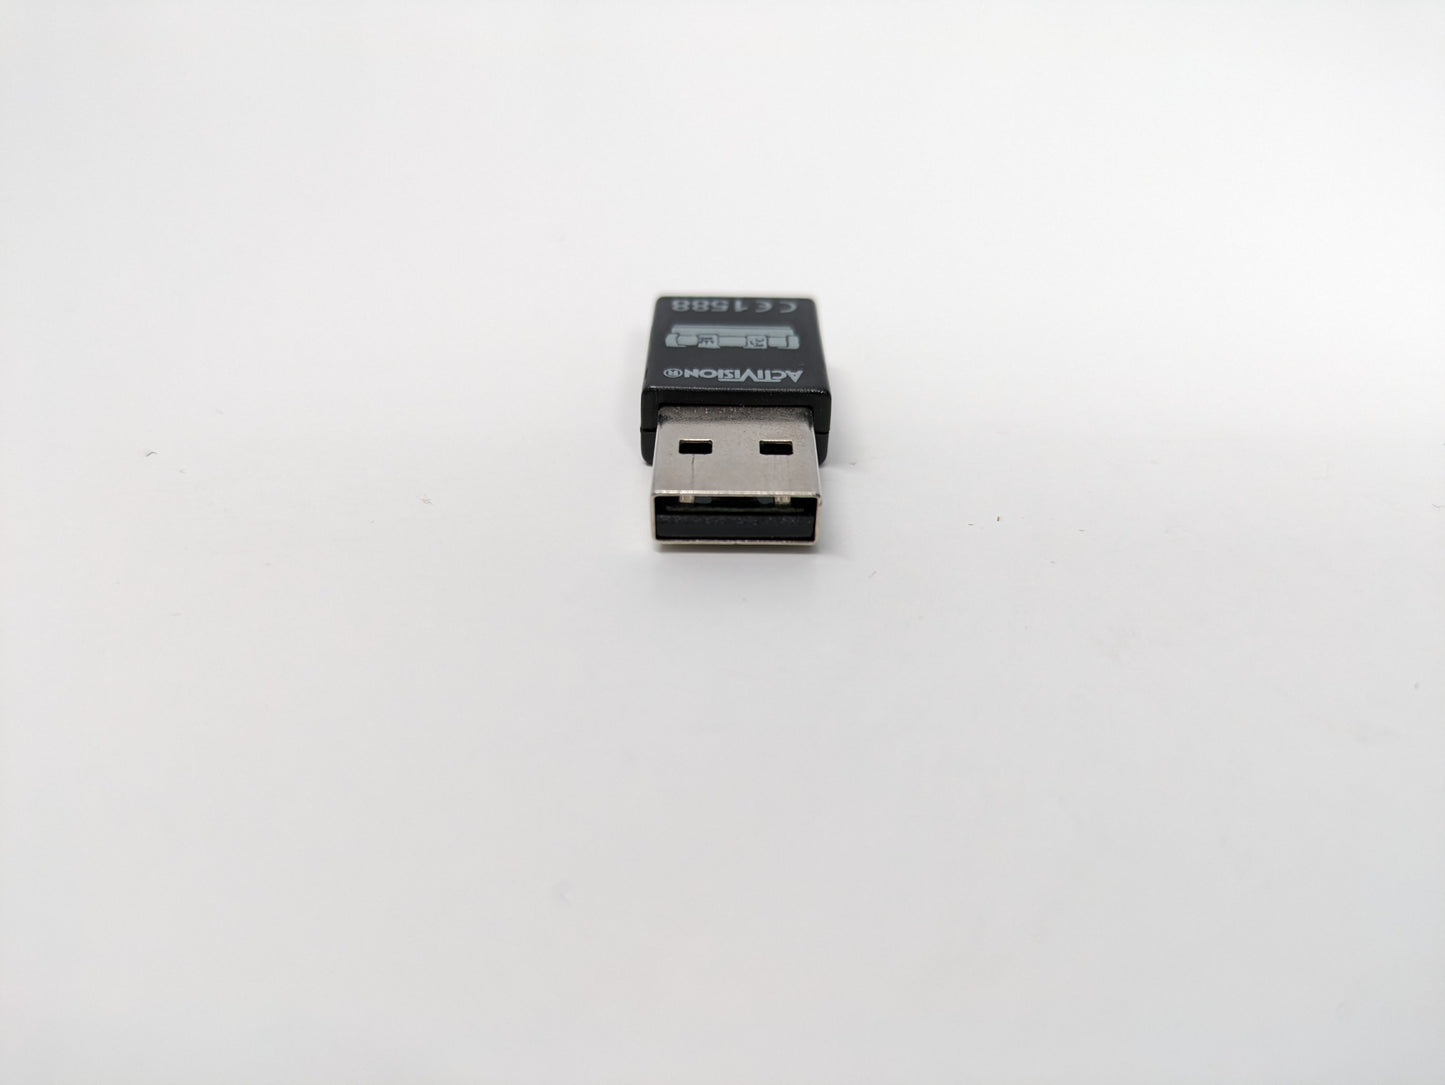 Skylanders Portal Wireless USB Dongle for Wii and PS3 - USED (GG37)